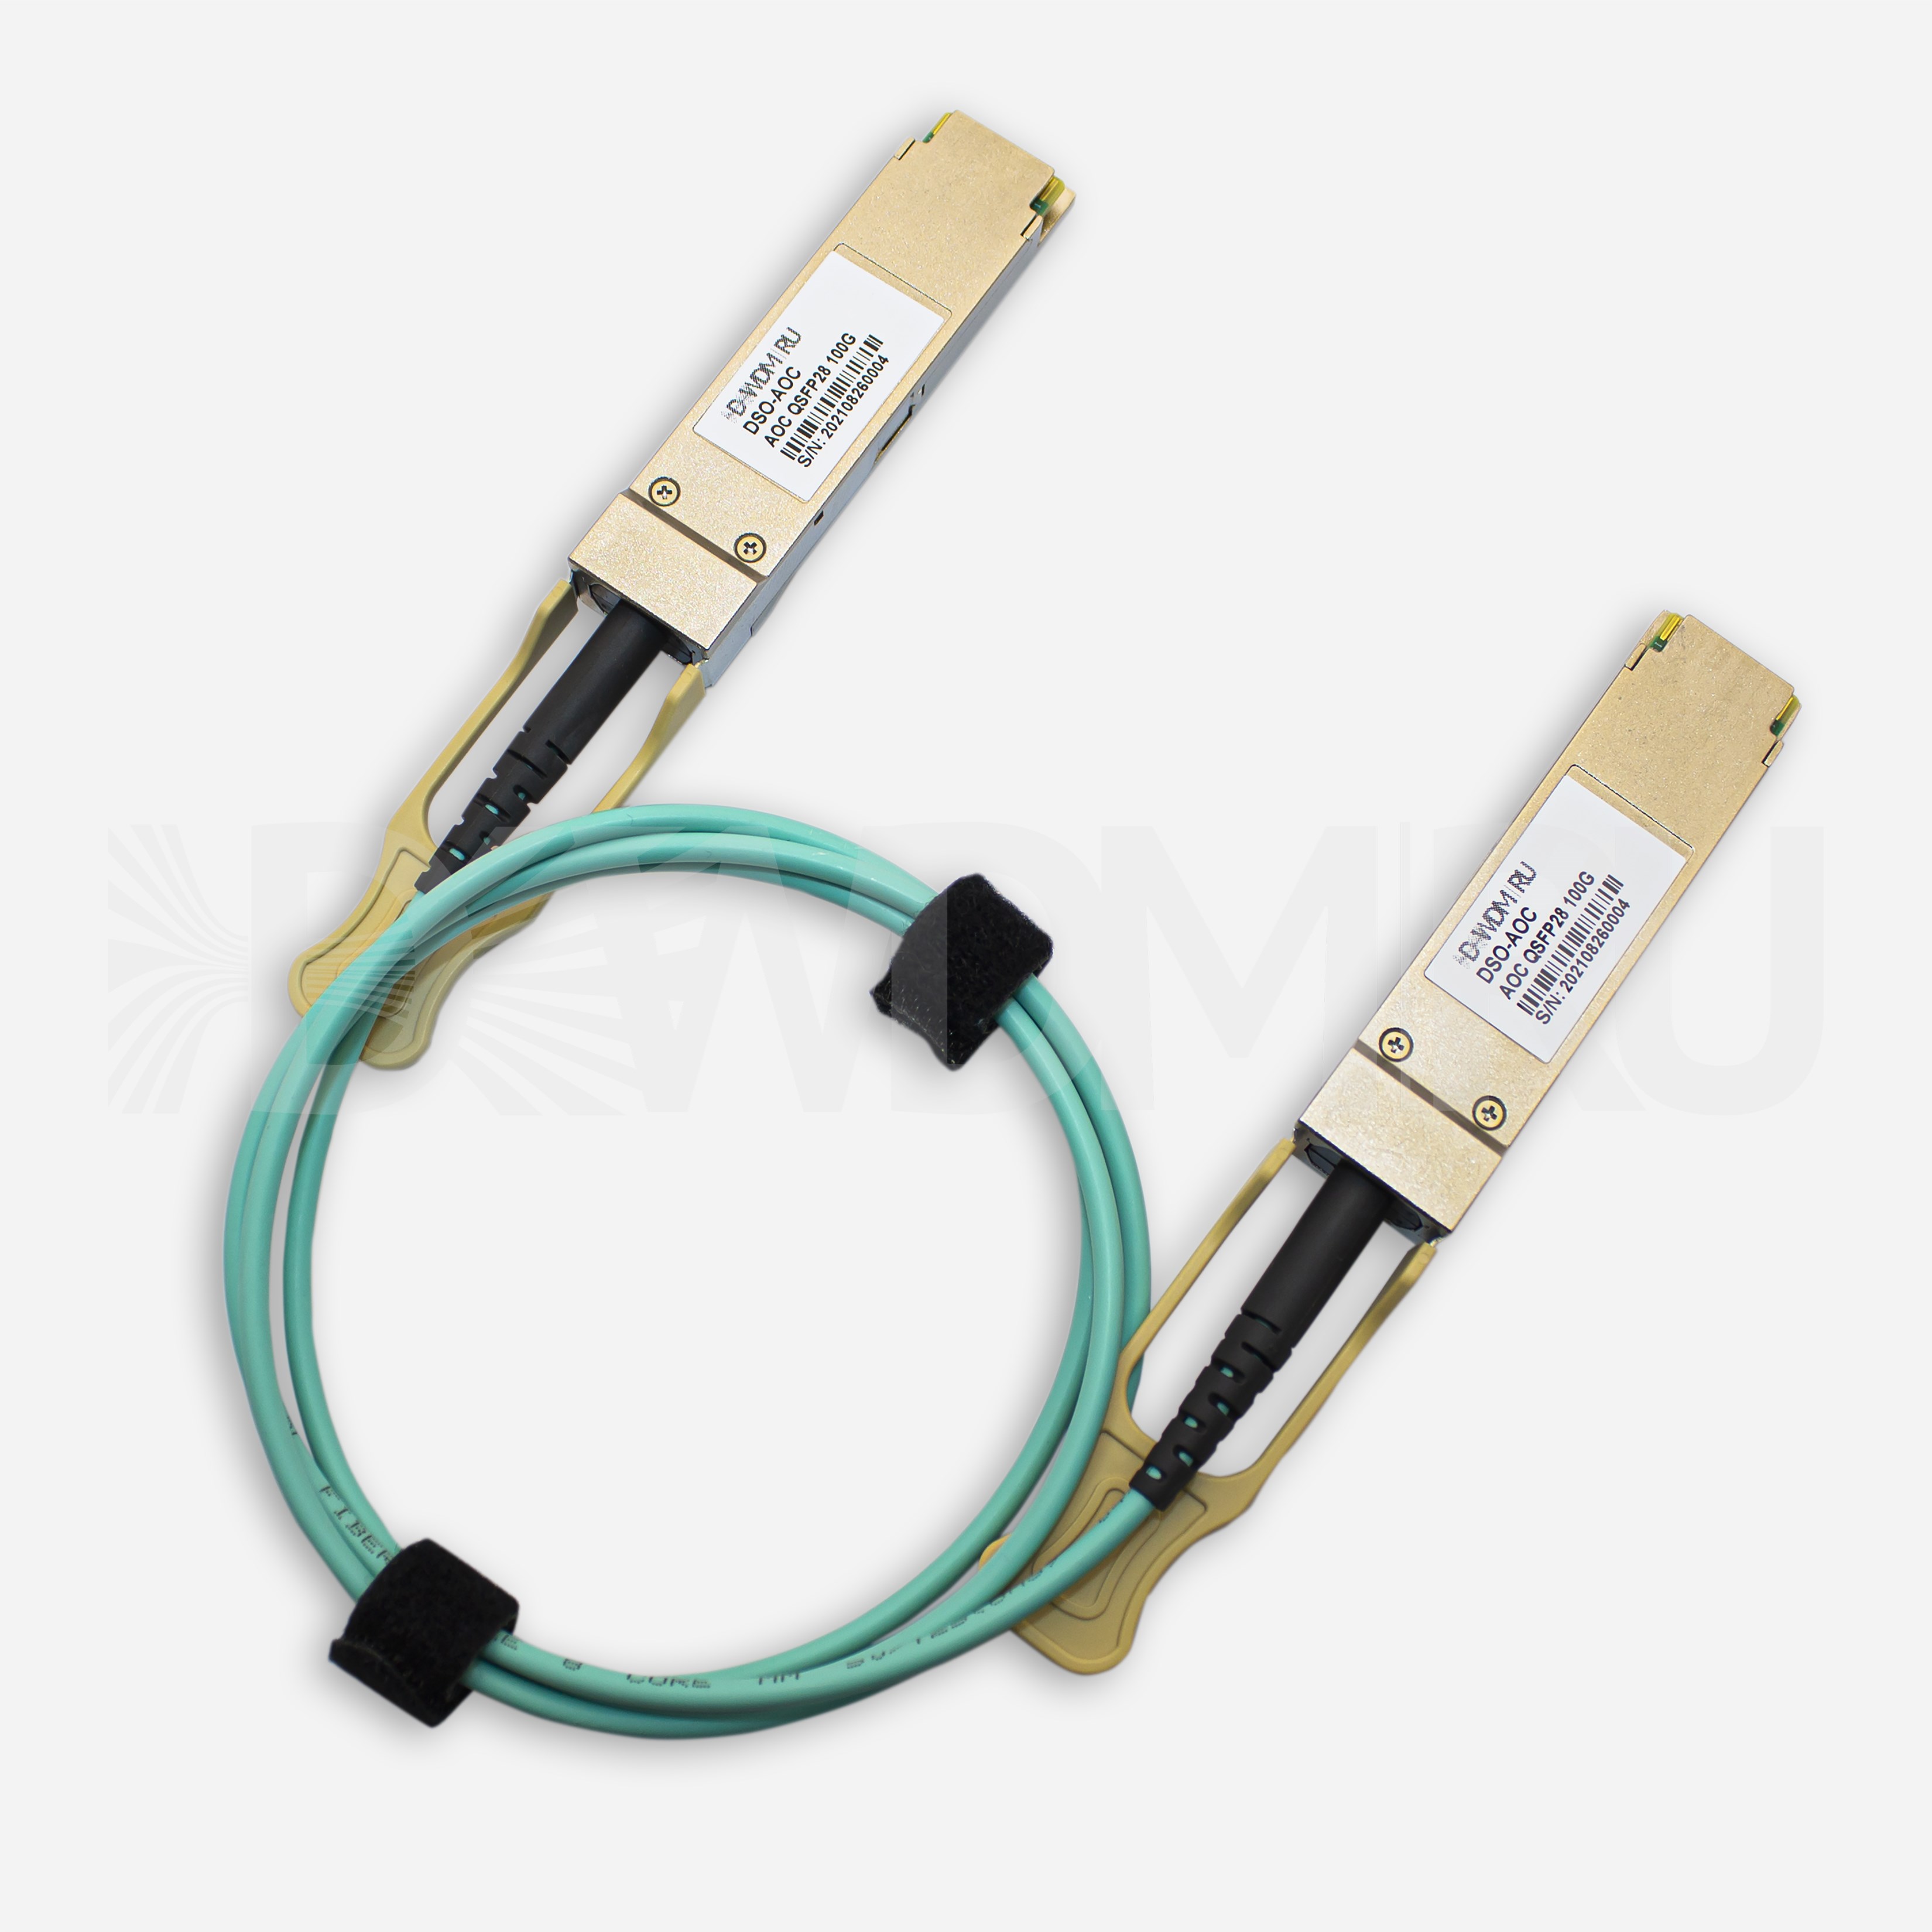 Active Optical Cable, QSFP28, 100 Гб/с, 1 м- ДВДМ.РУ (DSO-AOC-100-3)